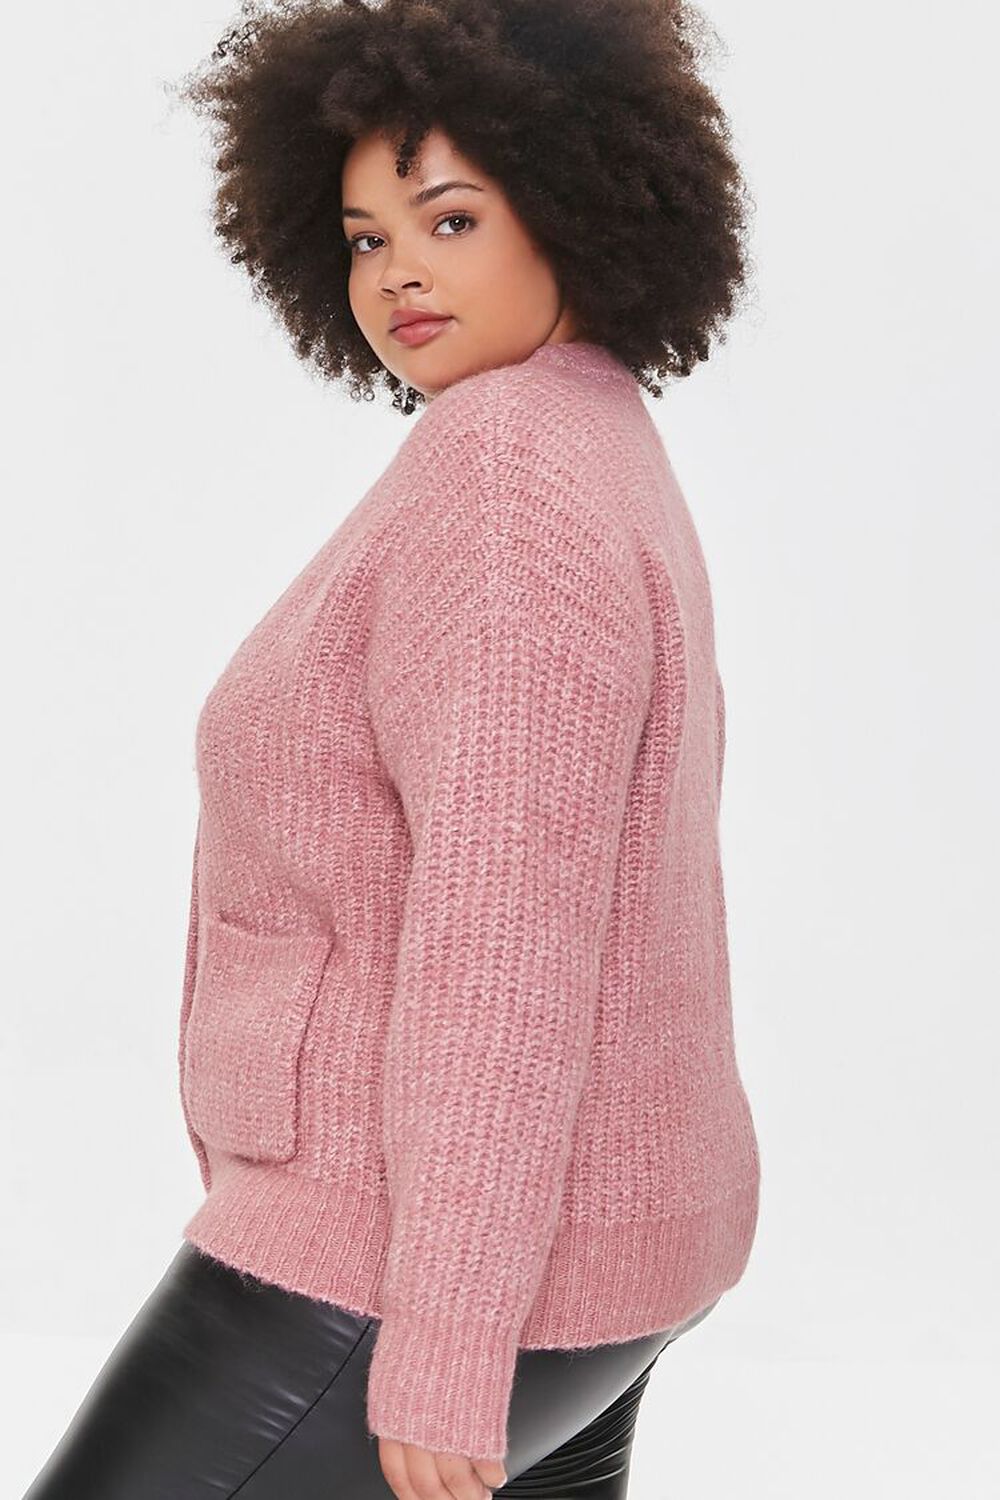 Plus Size Buttoned Cardigan Sweater, image 2